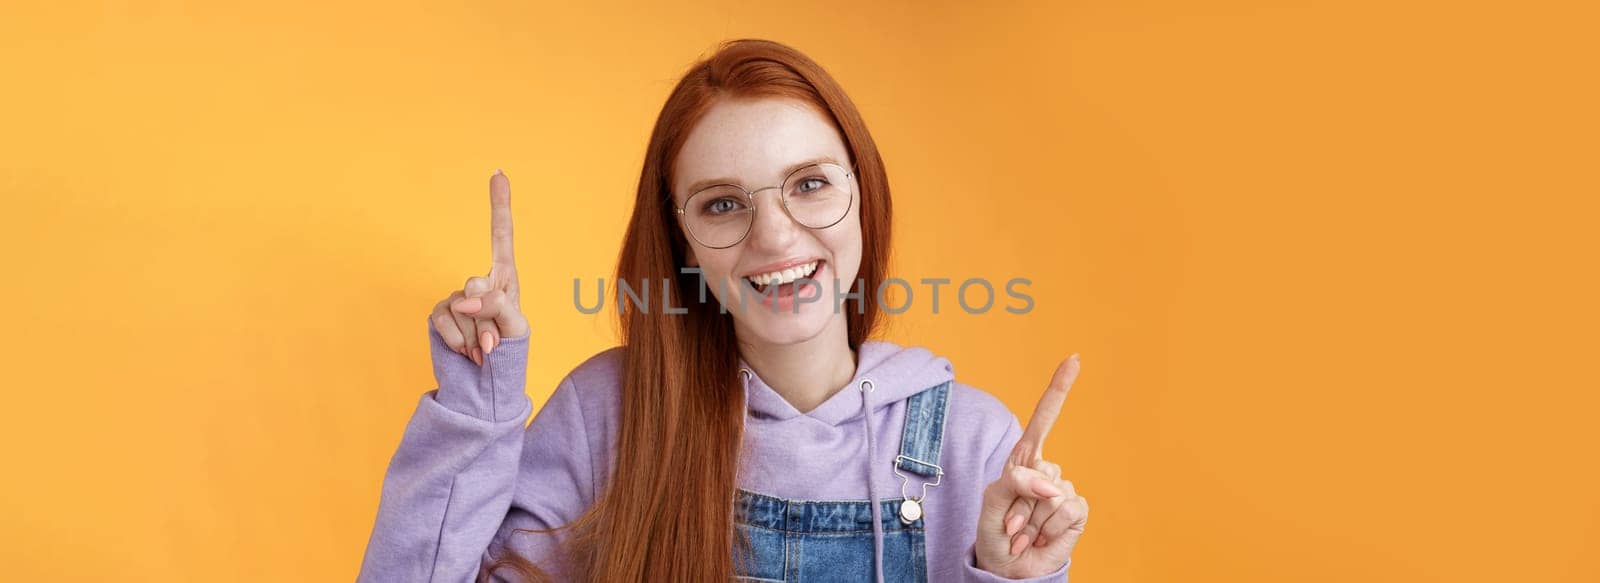 Lively enthusiastic millennial redhead girl coworker having fun celebrating small break joyfully dancing pointing up index fingers singing smiling white teeth promoting product, orange background.